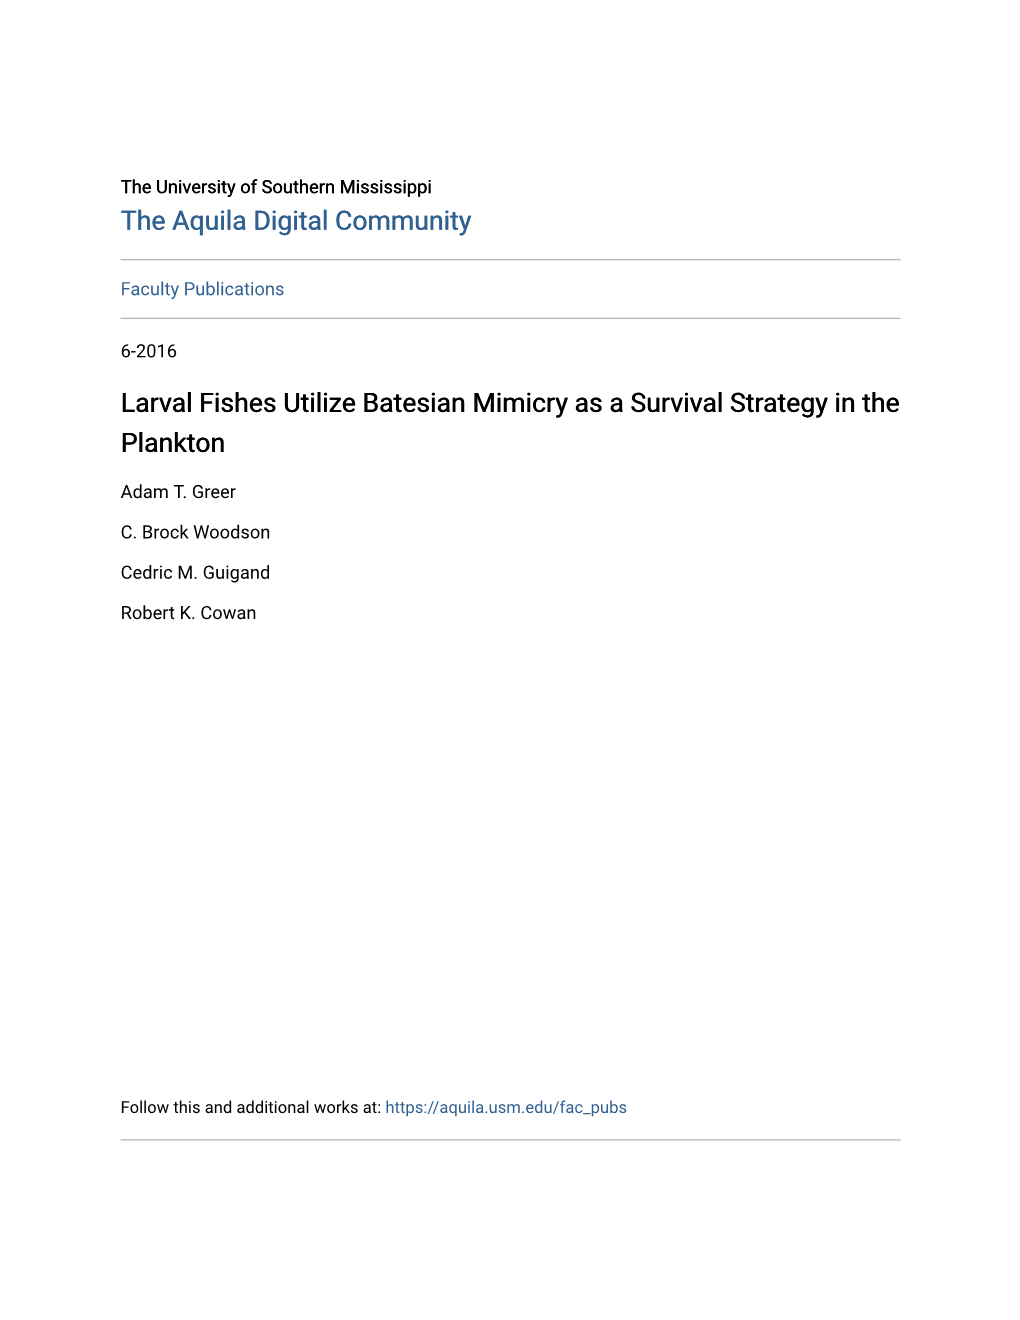 Larval Fishes Utilize Batesian Mimicry As a Survival Strategy in the Plankton